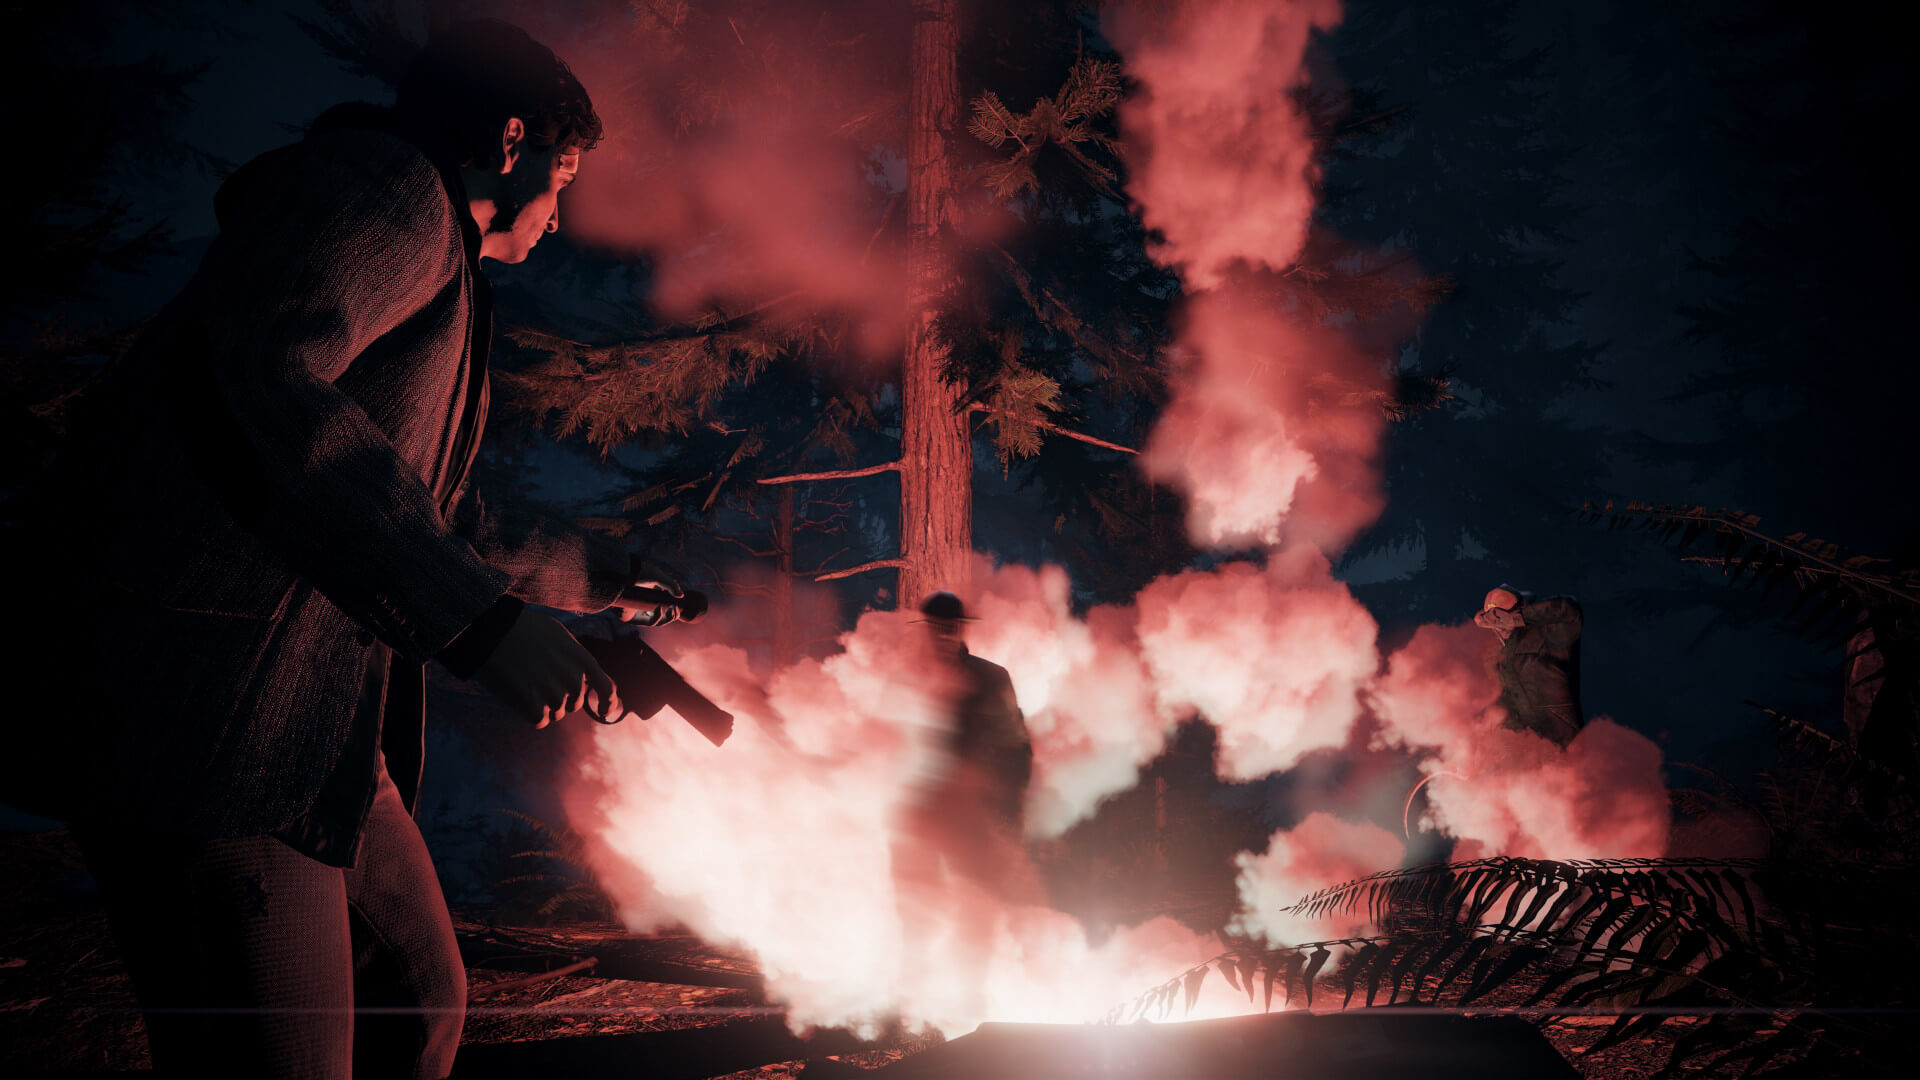 Alan Wake Remastered, a Remedy project